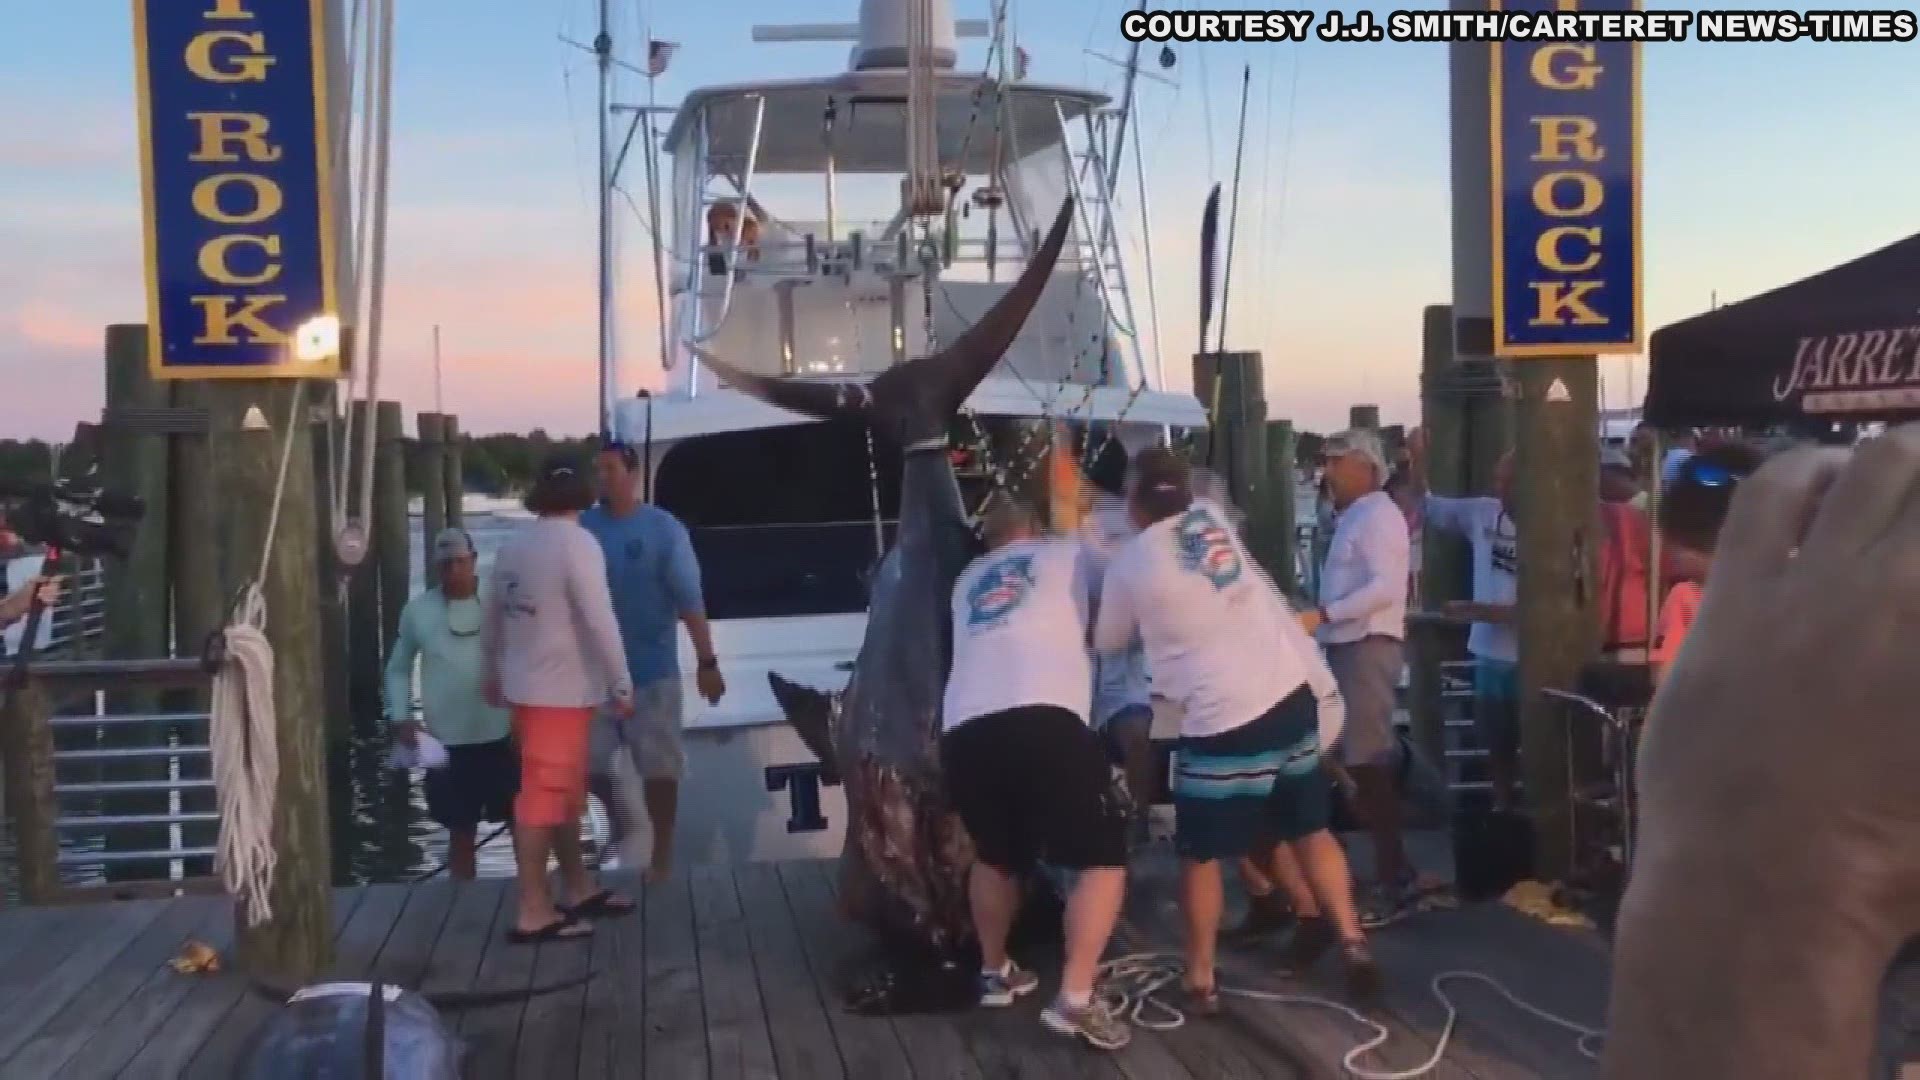 A crew reeled in a 914-pound blue marlin at the Big Rock Blue Marlin Fishing Tournament in Morehead City, NC.